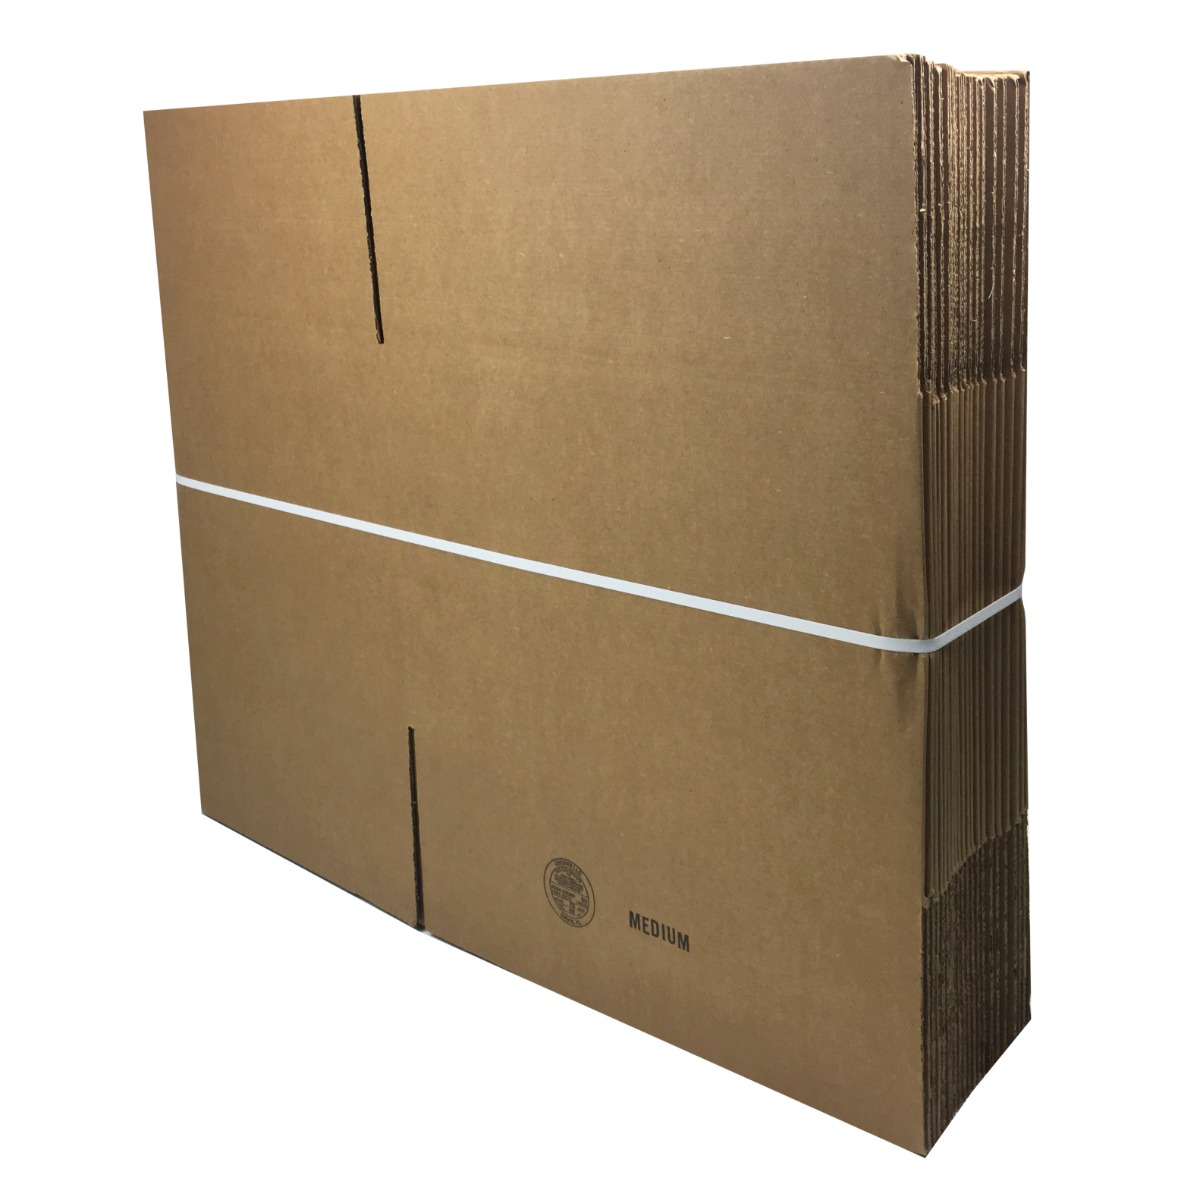 uBoxes Medium Cardboard Moving Boxes (20 Pack) 18 x 14 x 12-Inch - image 5 of 13